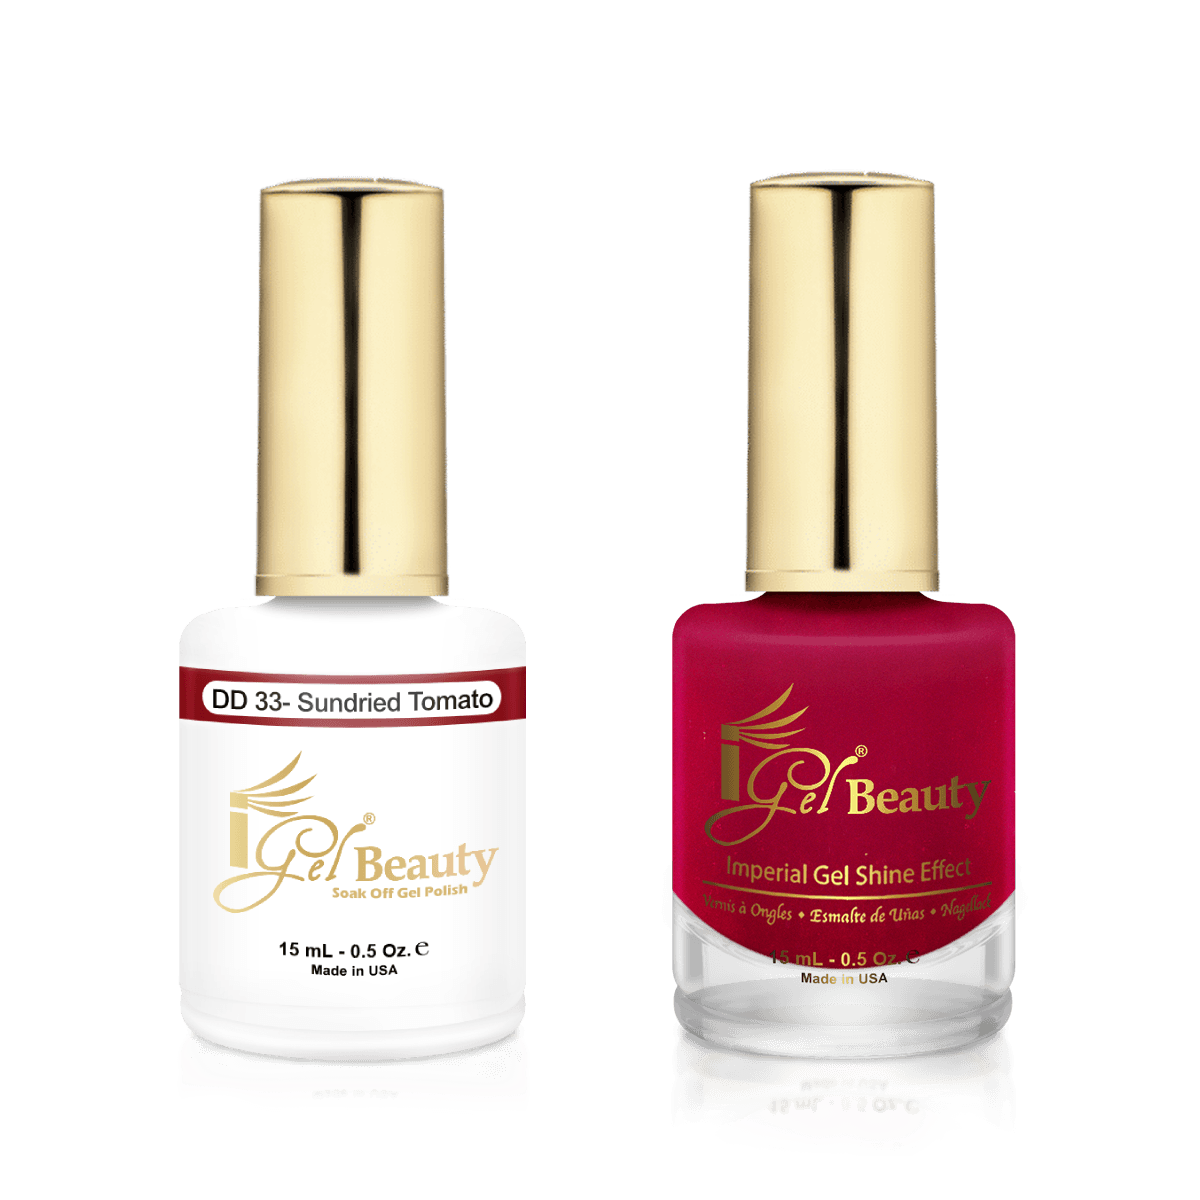 IGel Duo Gel Polish + Matching Nail Lacquer DD 33 SUNDRIED TOMATO